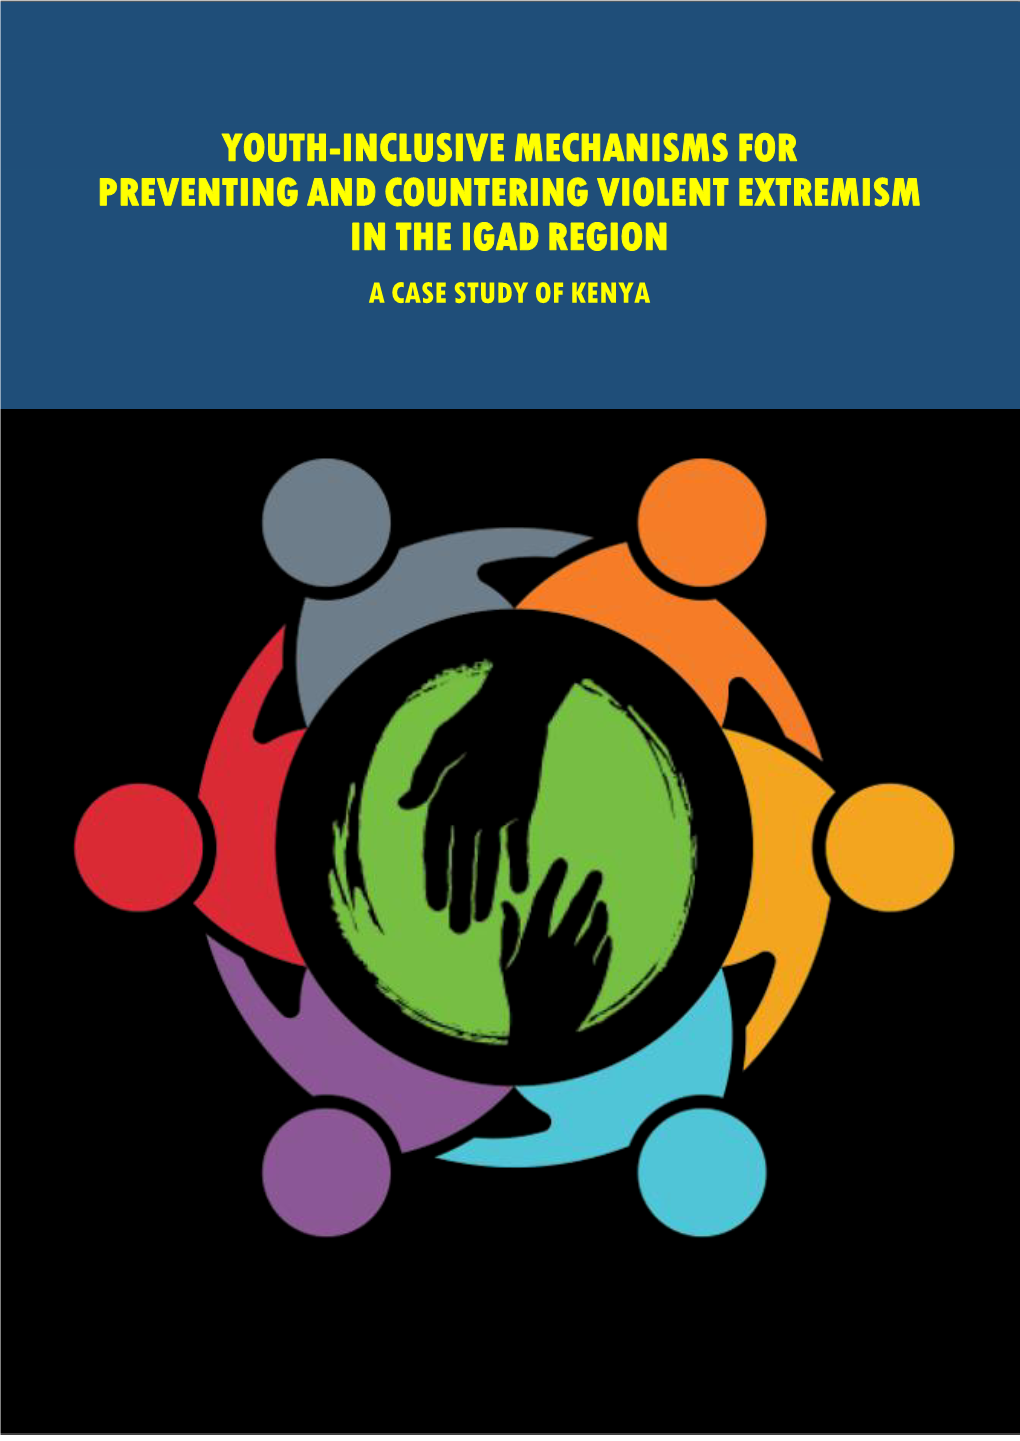 Youth-Inclusive Mechanisms for Preventing and Countering Violent Extremism in the Igad Region a Case Study of Kenya